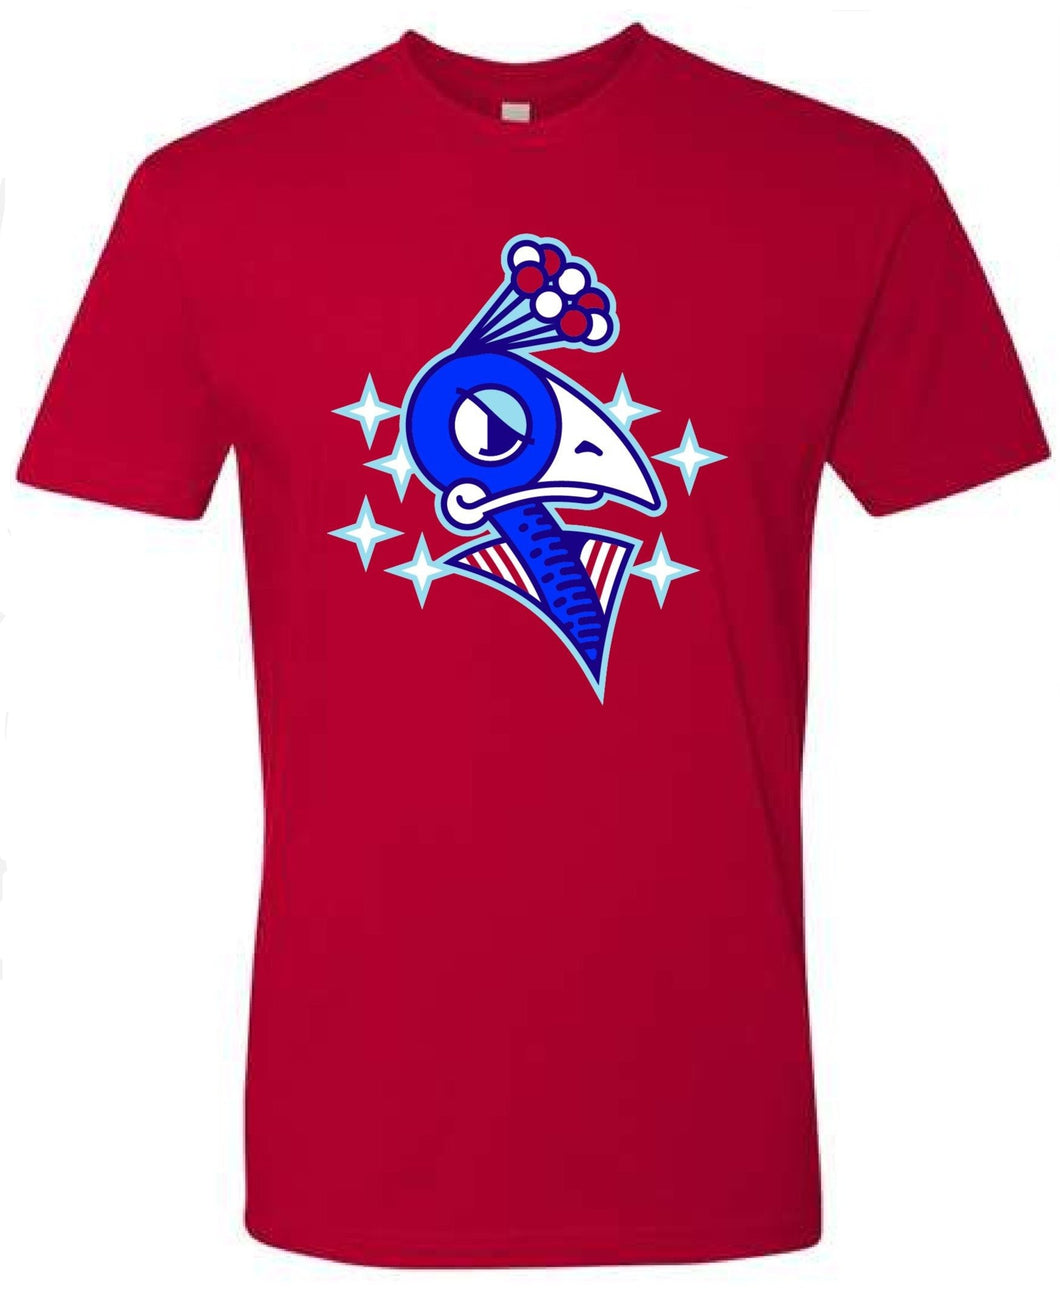 Limited Red, White & Blue Tee EXTENDED SIZES